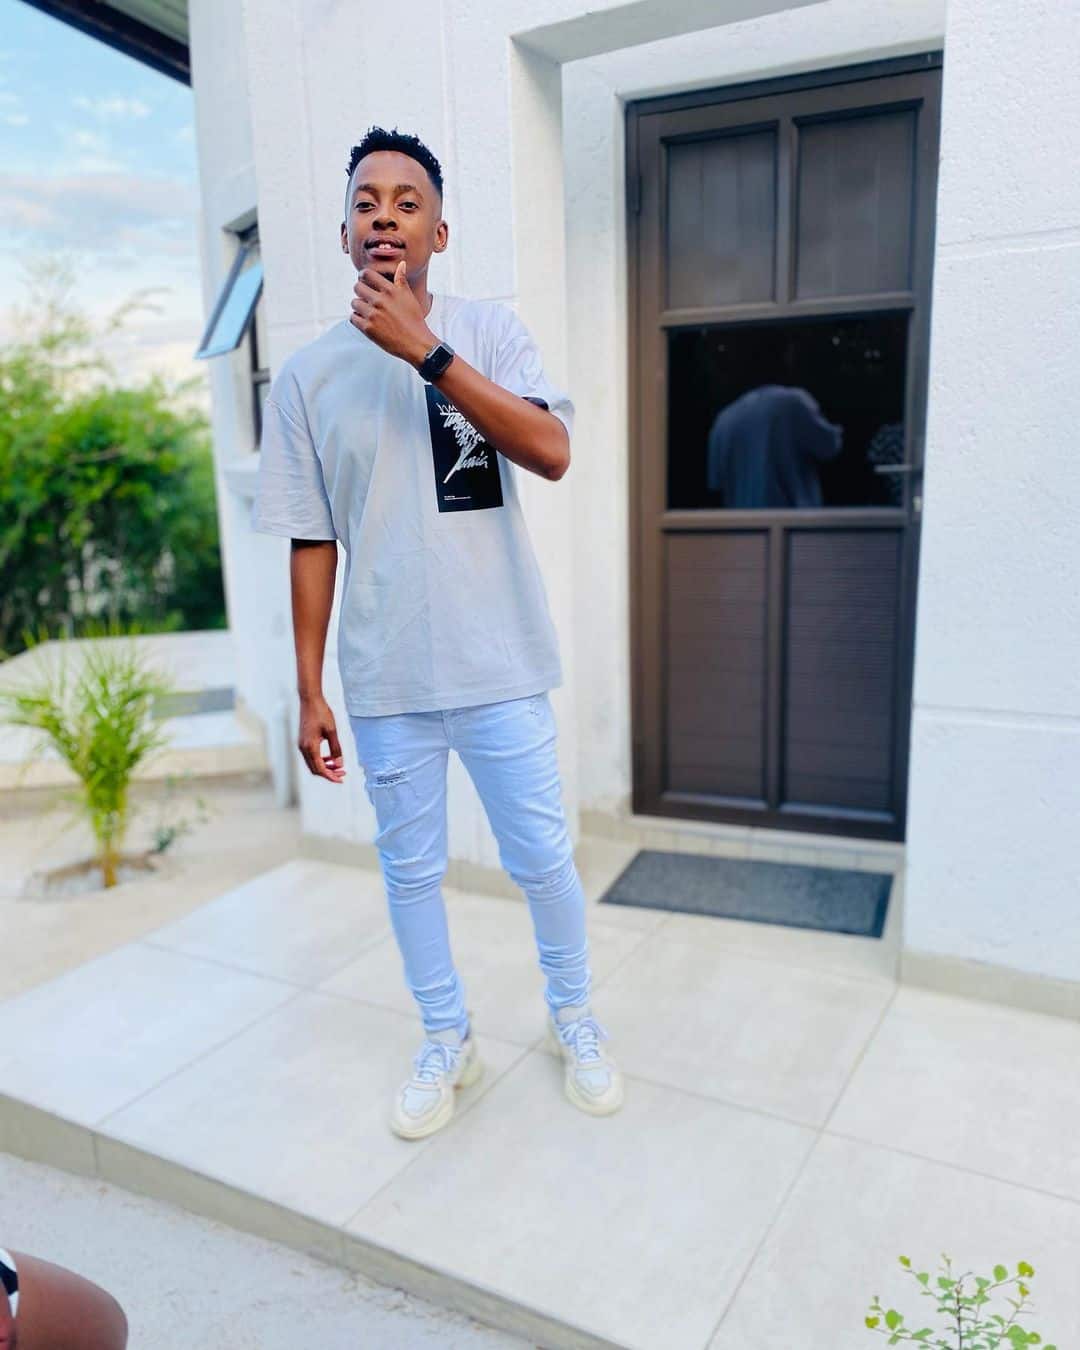 Here is all you need to know about Mas Musiq and his music in 2020!